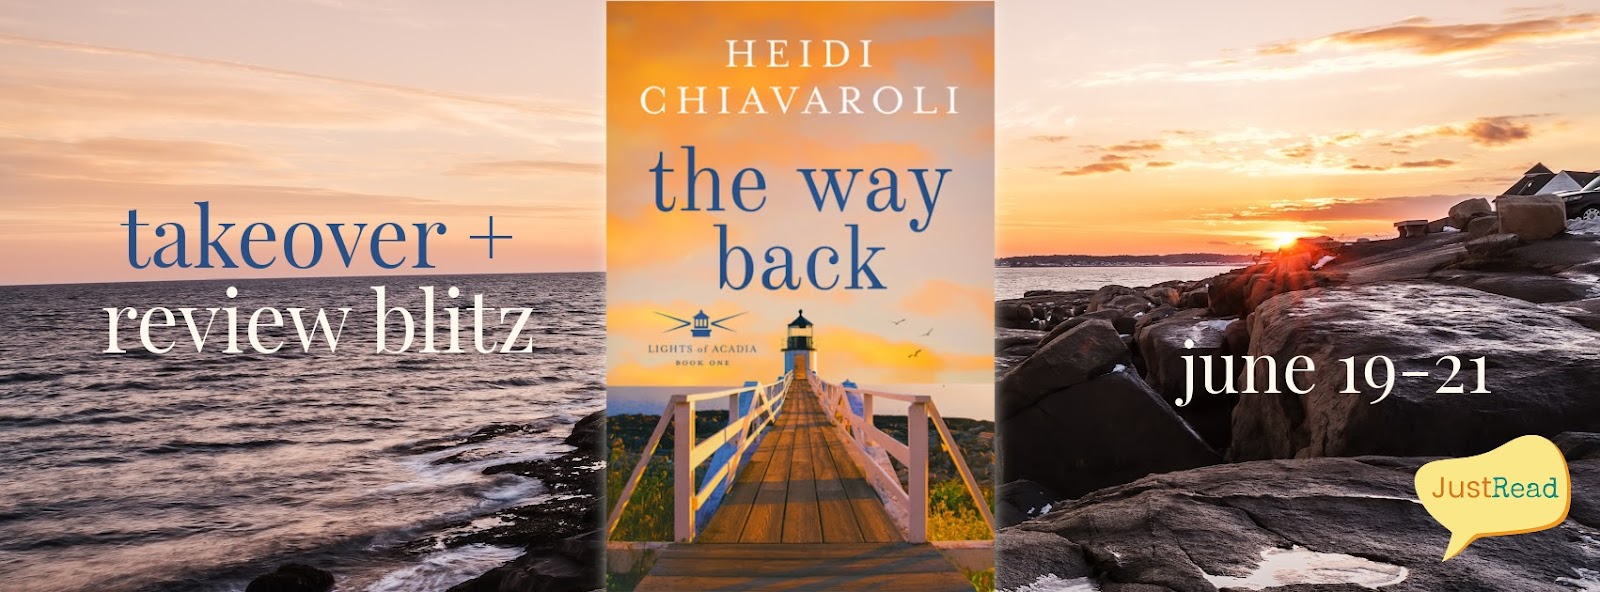 The Way Back JustRead Takeover + Review Blitz